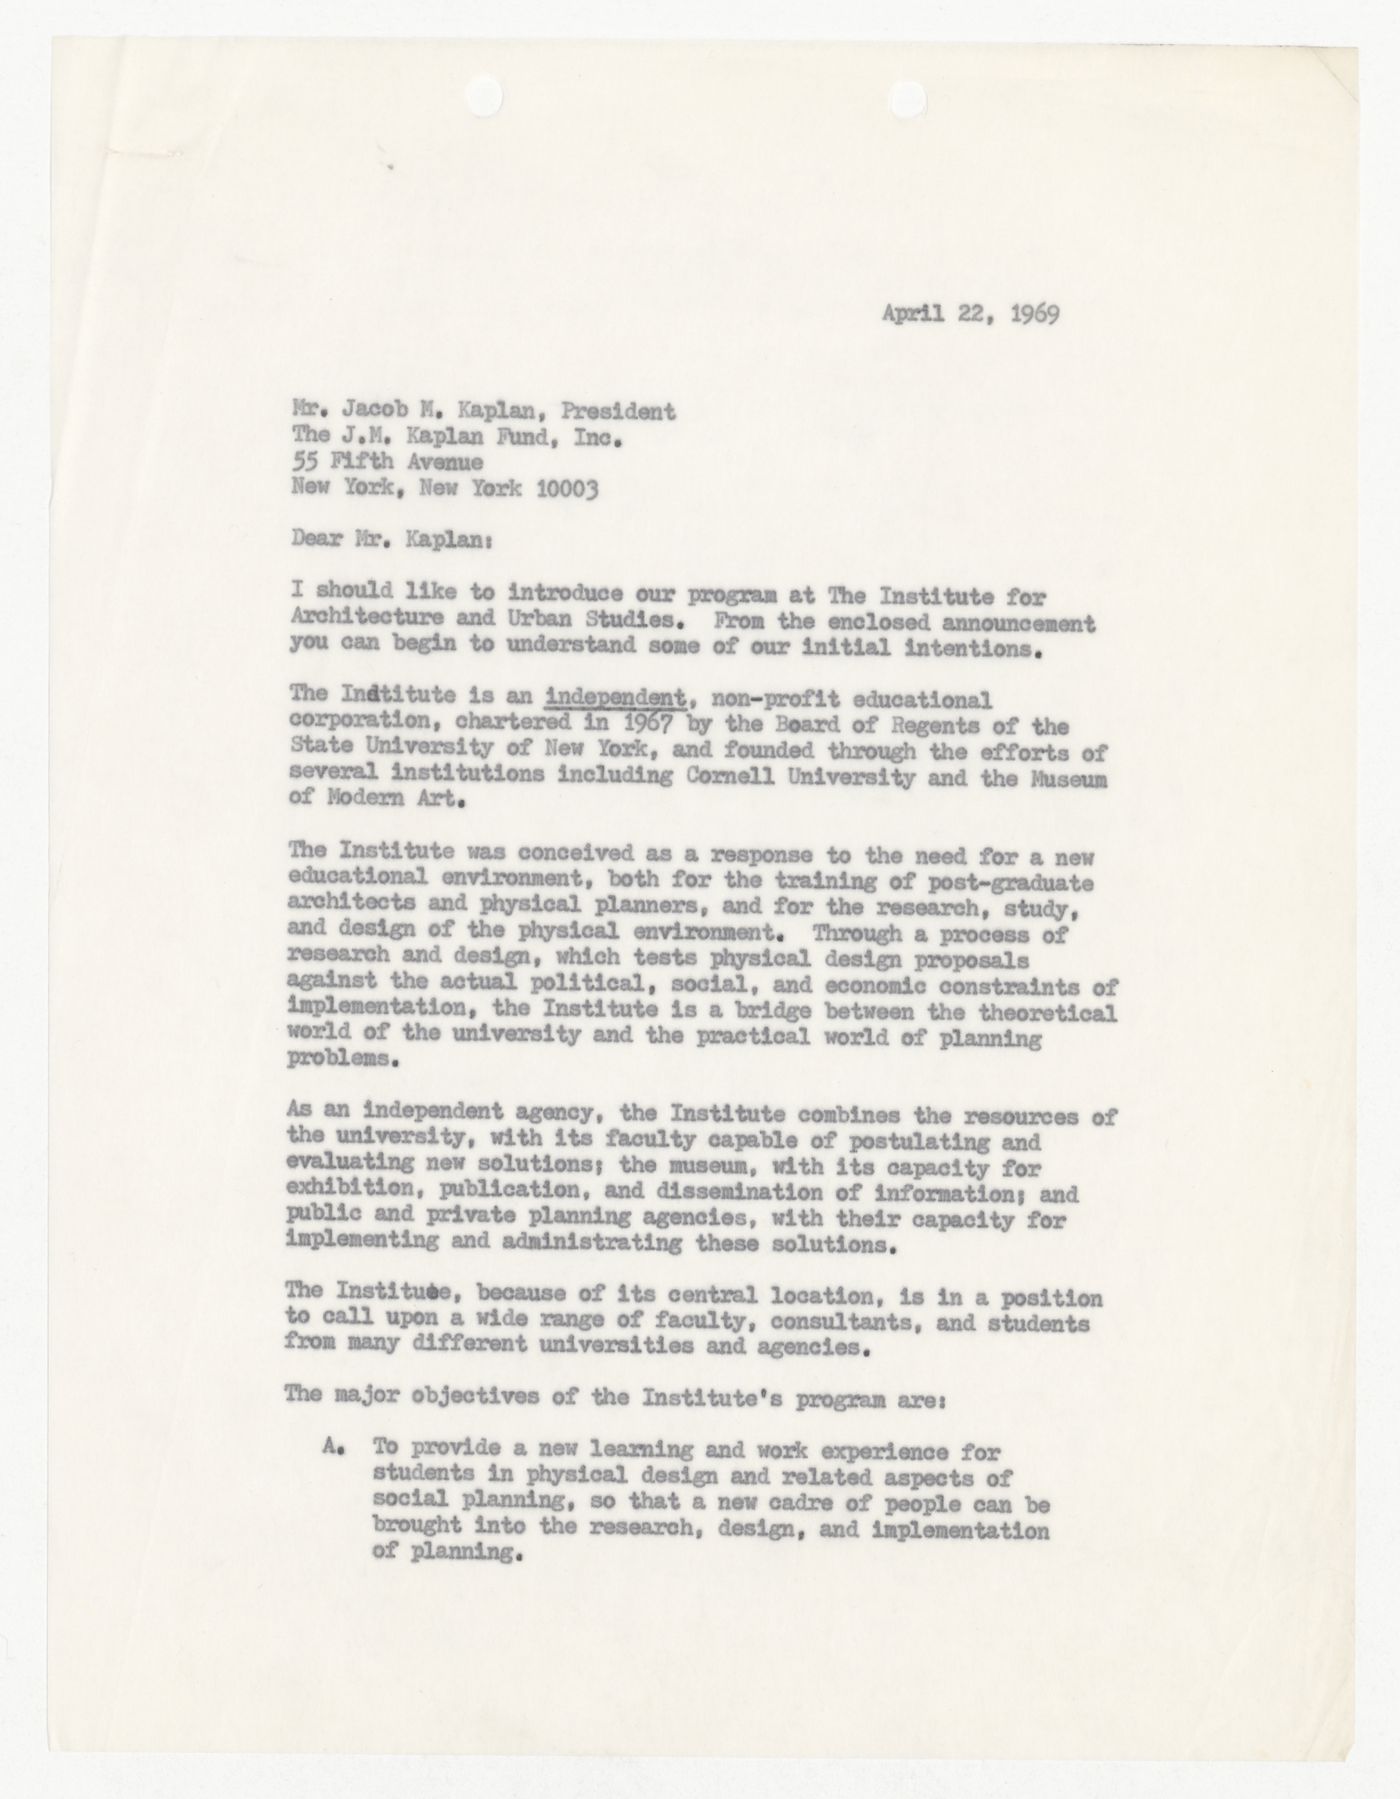 Letter from Peter D. Eisenman to Jacob M. Kaplan requesting a donation including a brief overview of IAUS history and projects